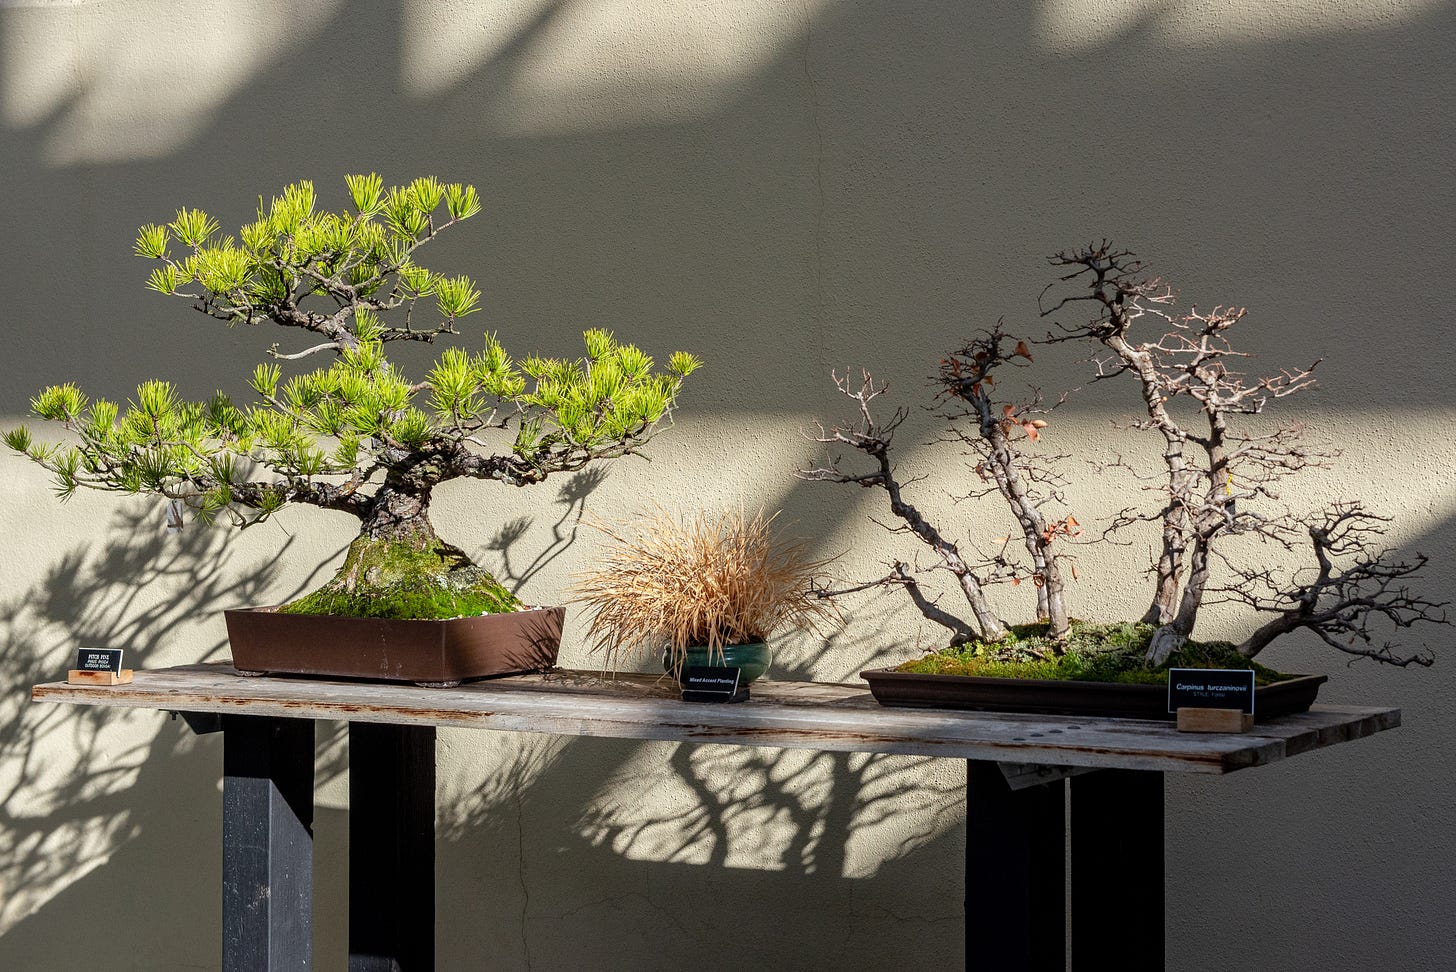 ID: A pitch pine and hornbeam forest bonsai in the bonsai museum.